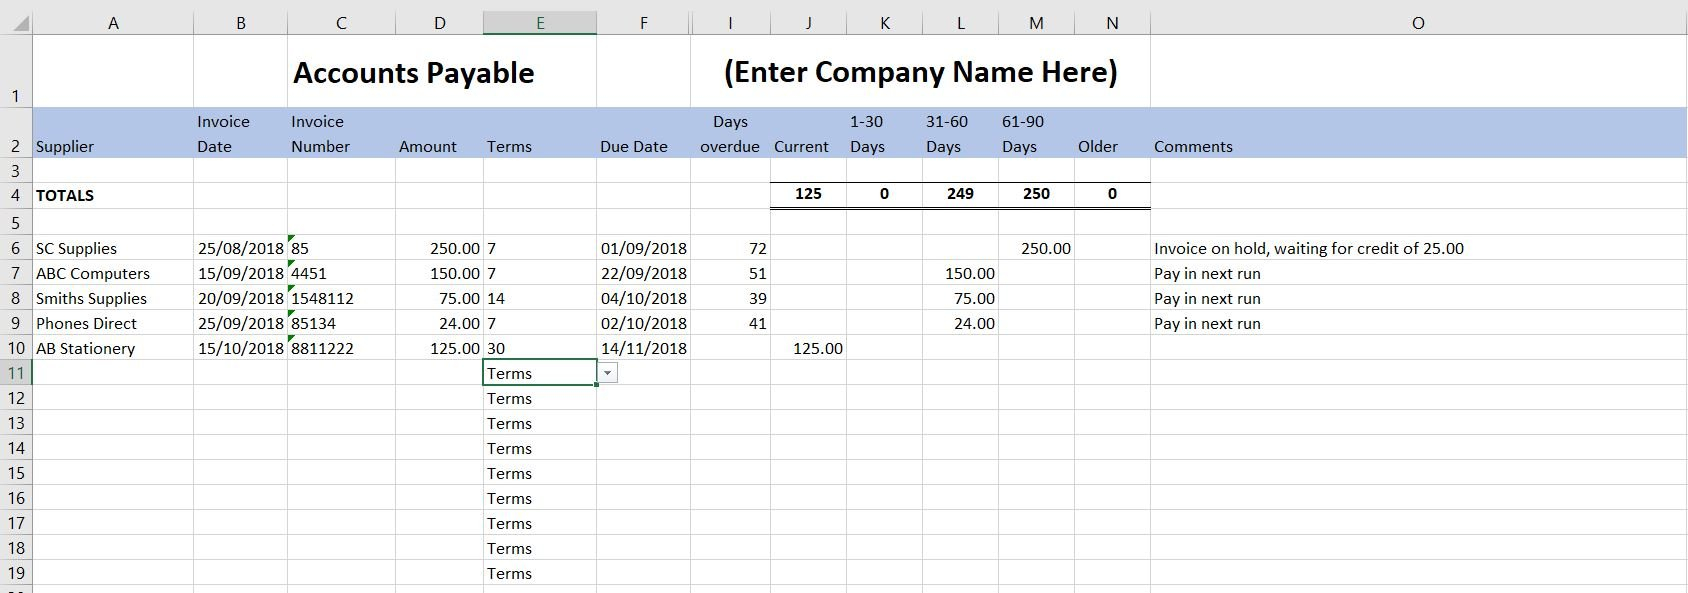 Free Excel Bookkeeping Templates - 12 Accounts Spreadsheets With Sole Trader Accounts Spreadsheet